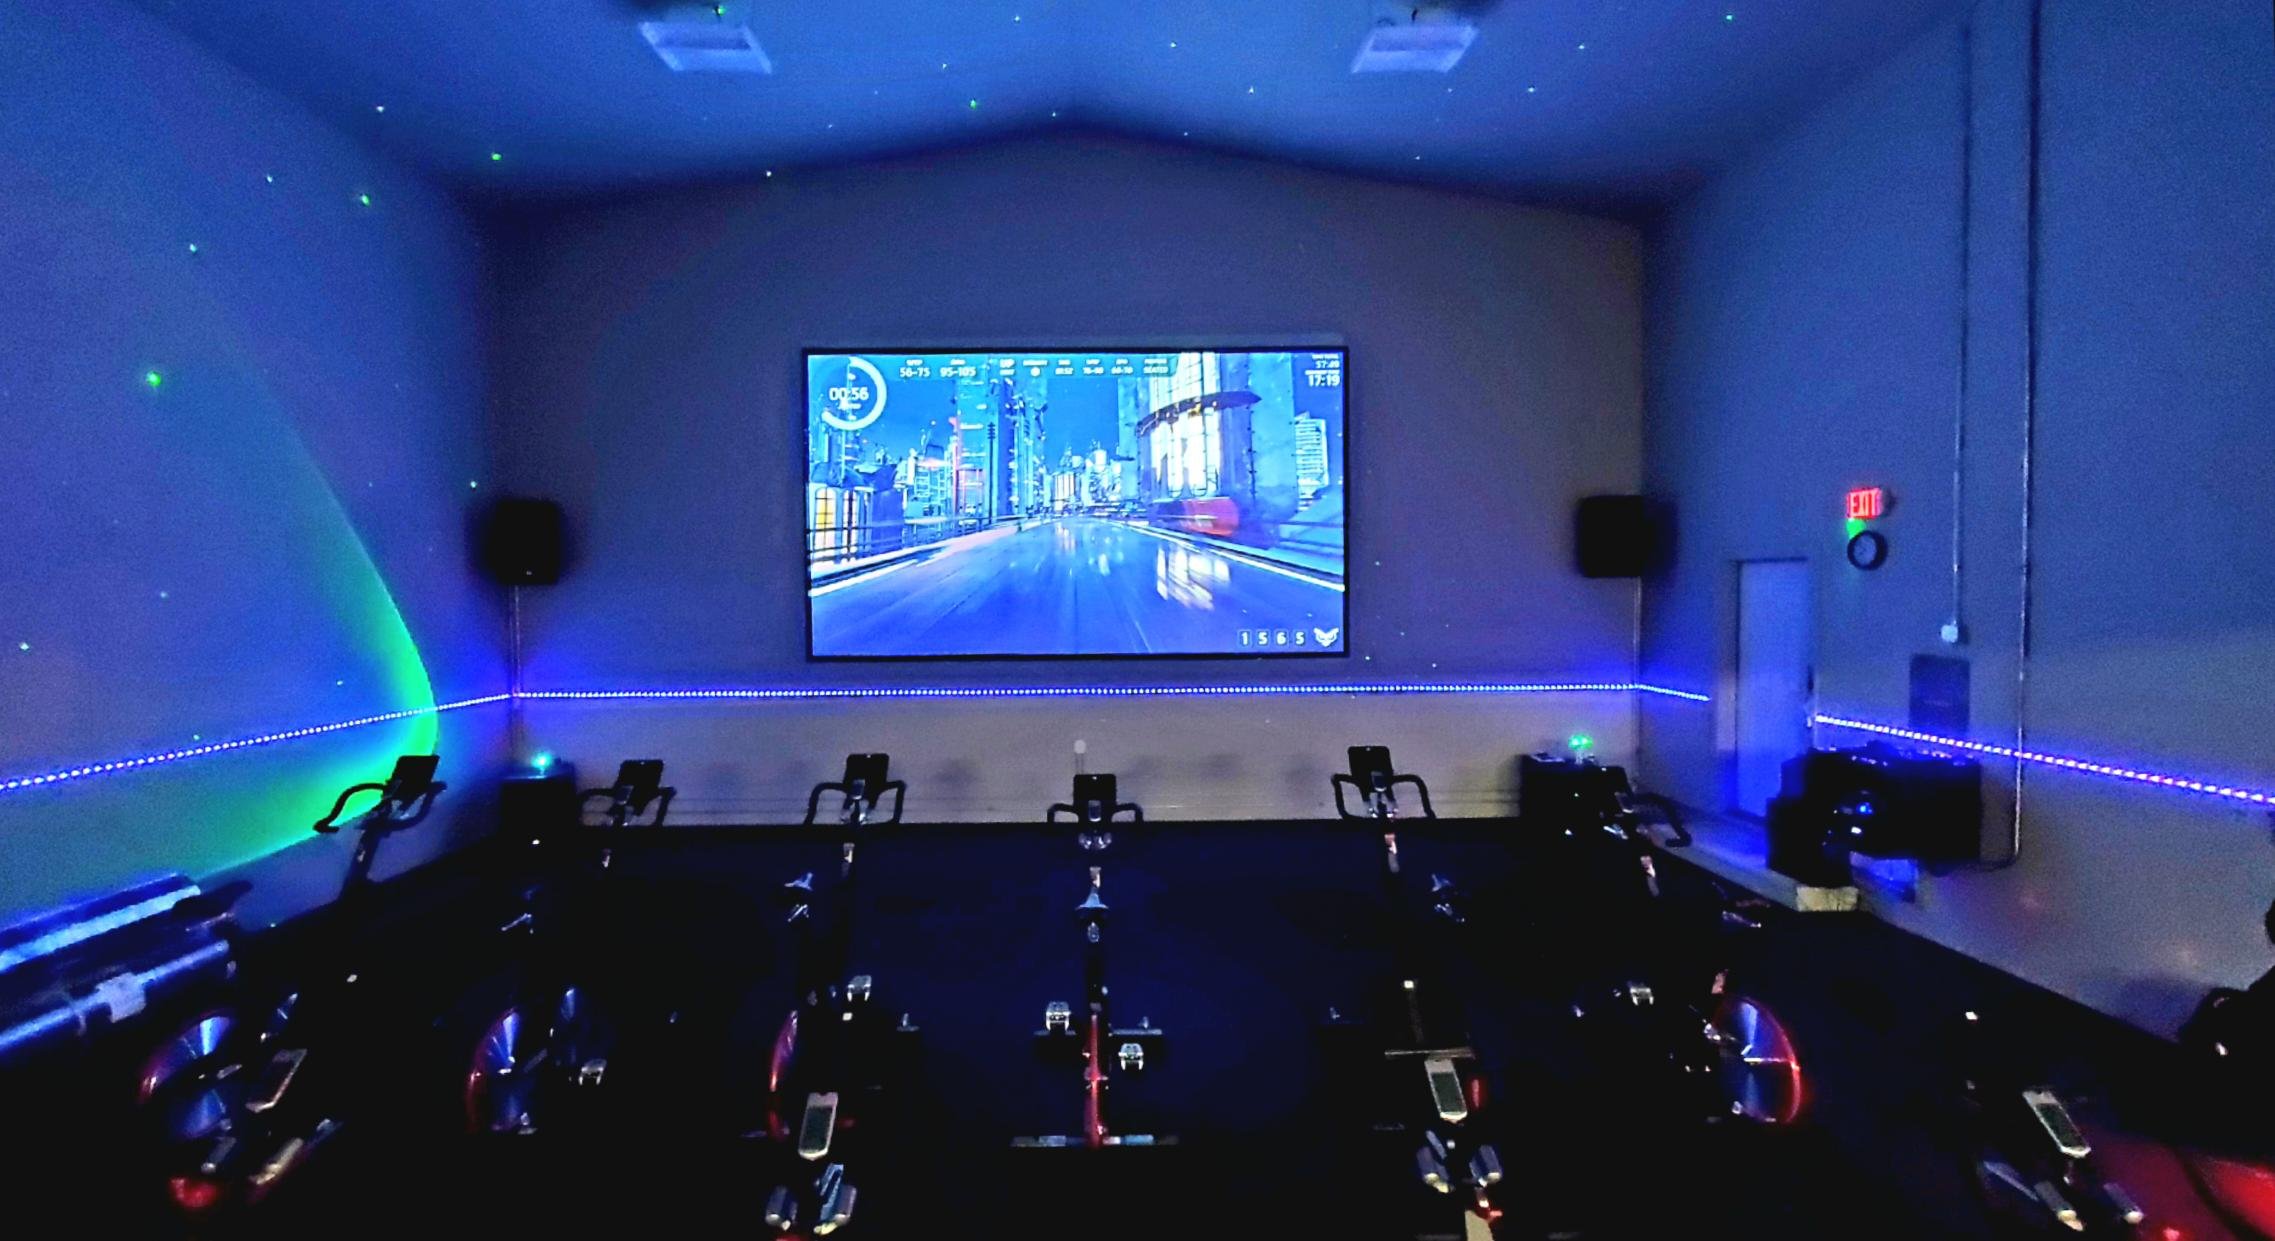 FEATURING 18 BIKES AND A SCREEN THAT'S OUTTA THIS WORLD!